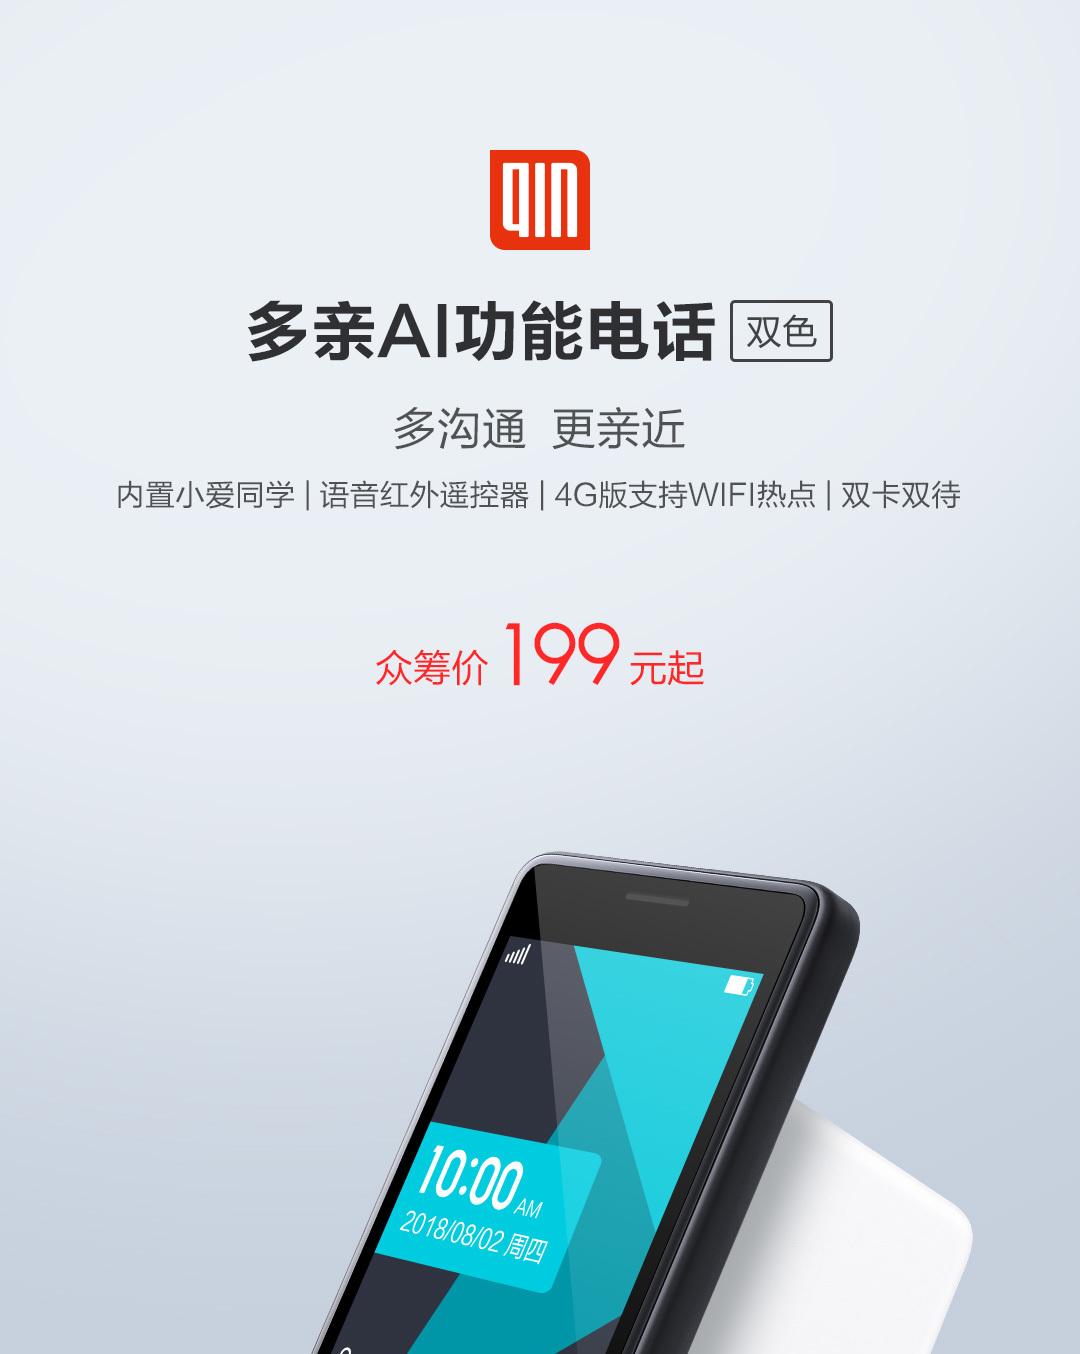 Xiaomi to bring Qin AI Feature Android Phone in China